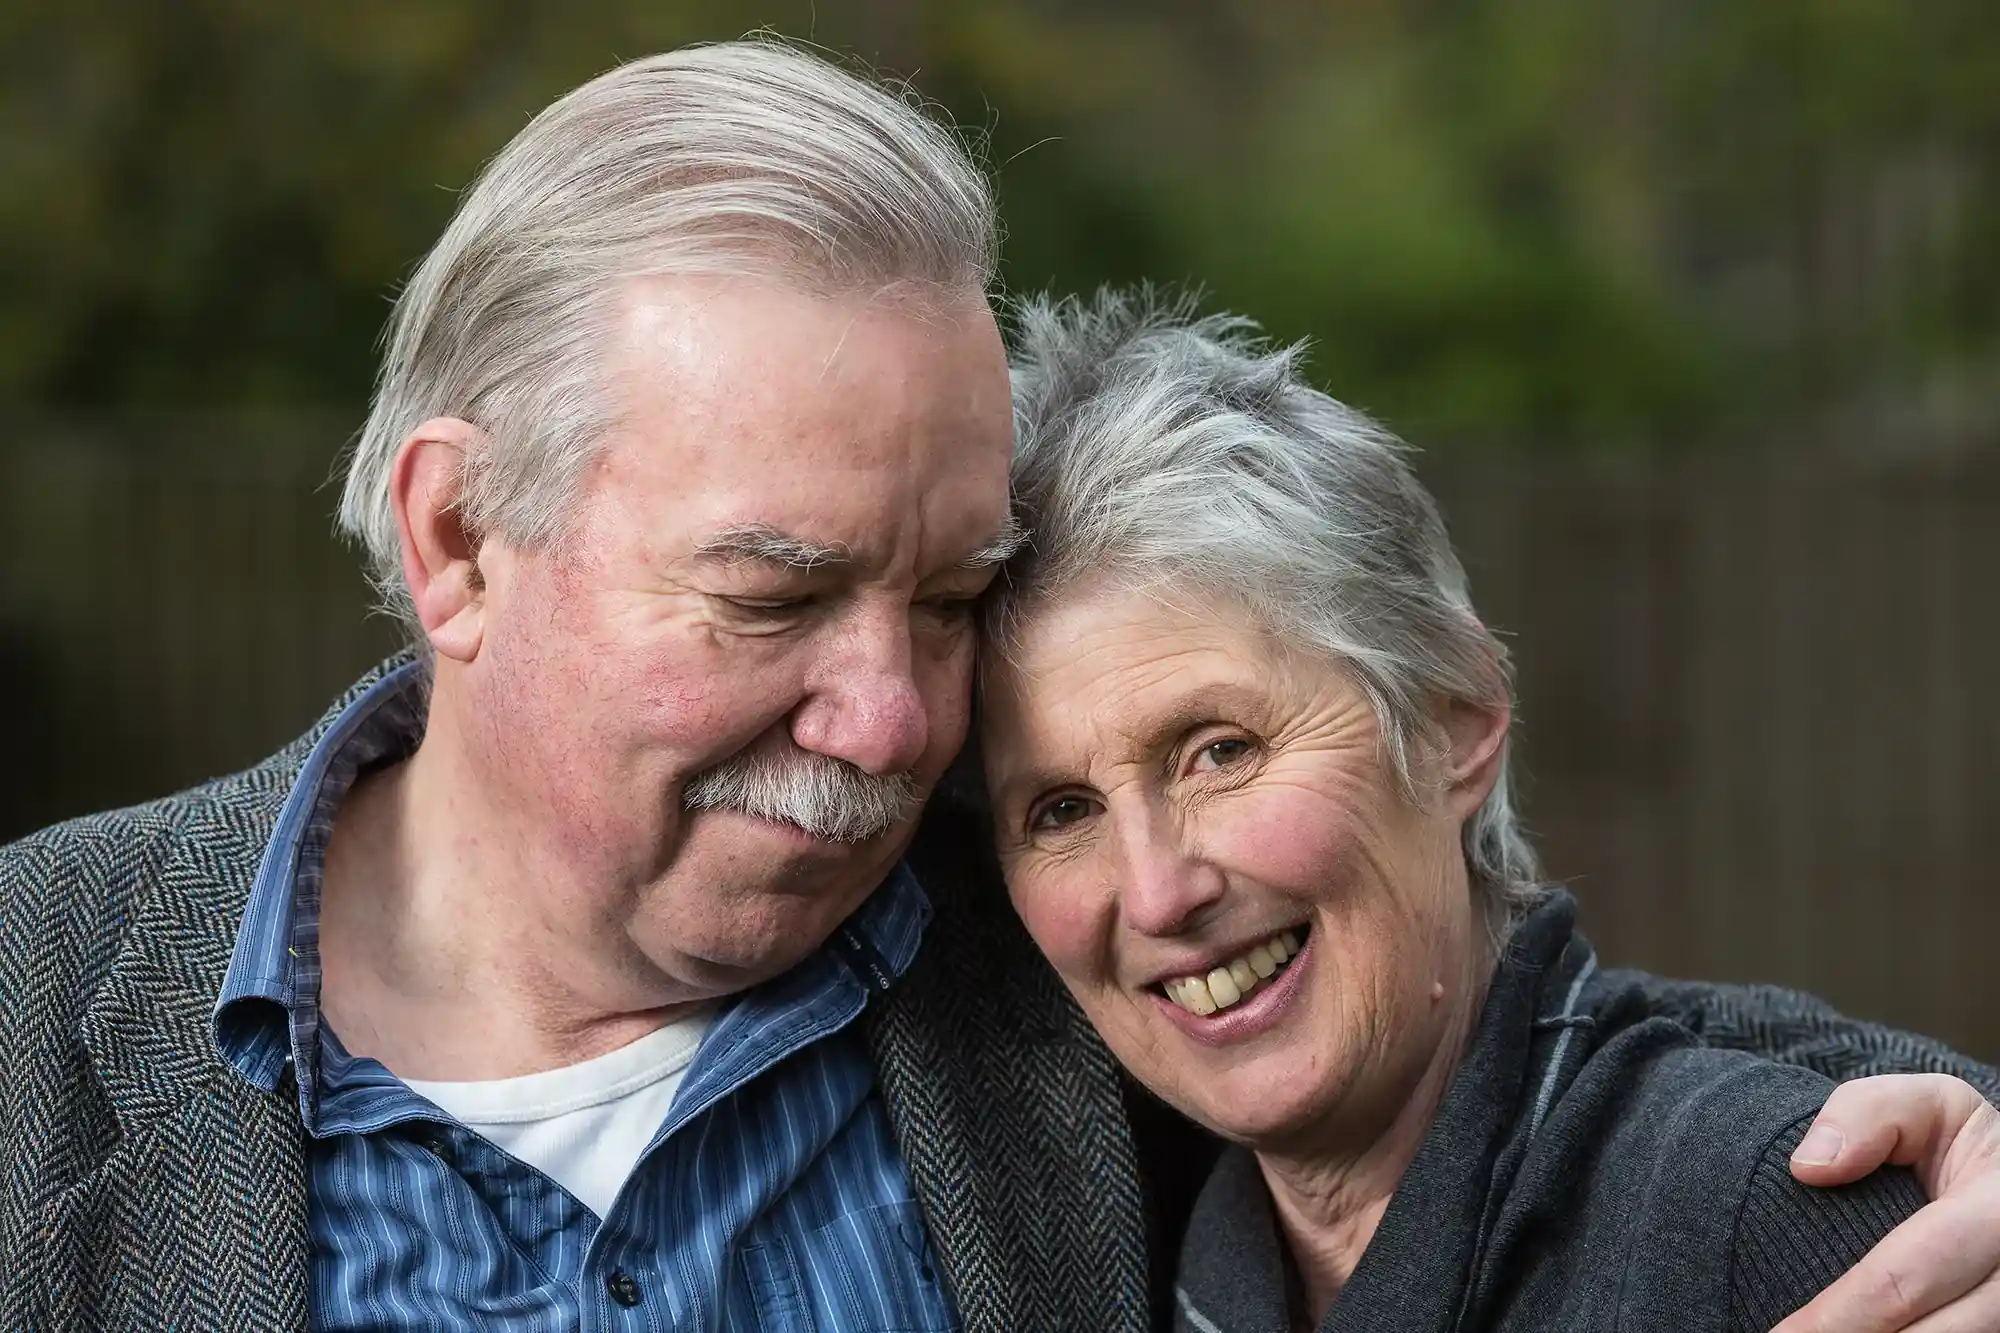 An elderly couple stands close together outdoors, smiling warmly. The woman has short gray hair and the man has white hair and a mustache. They are dressed in casual, warm clothing.